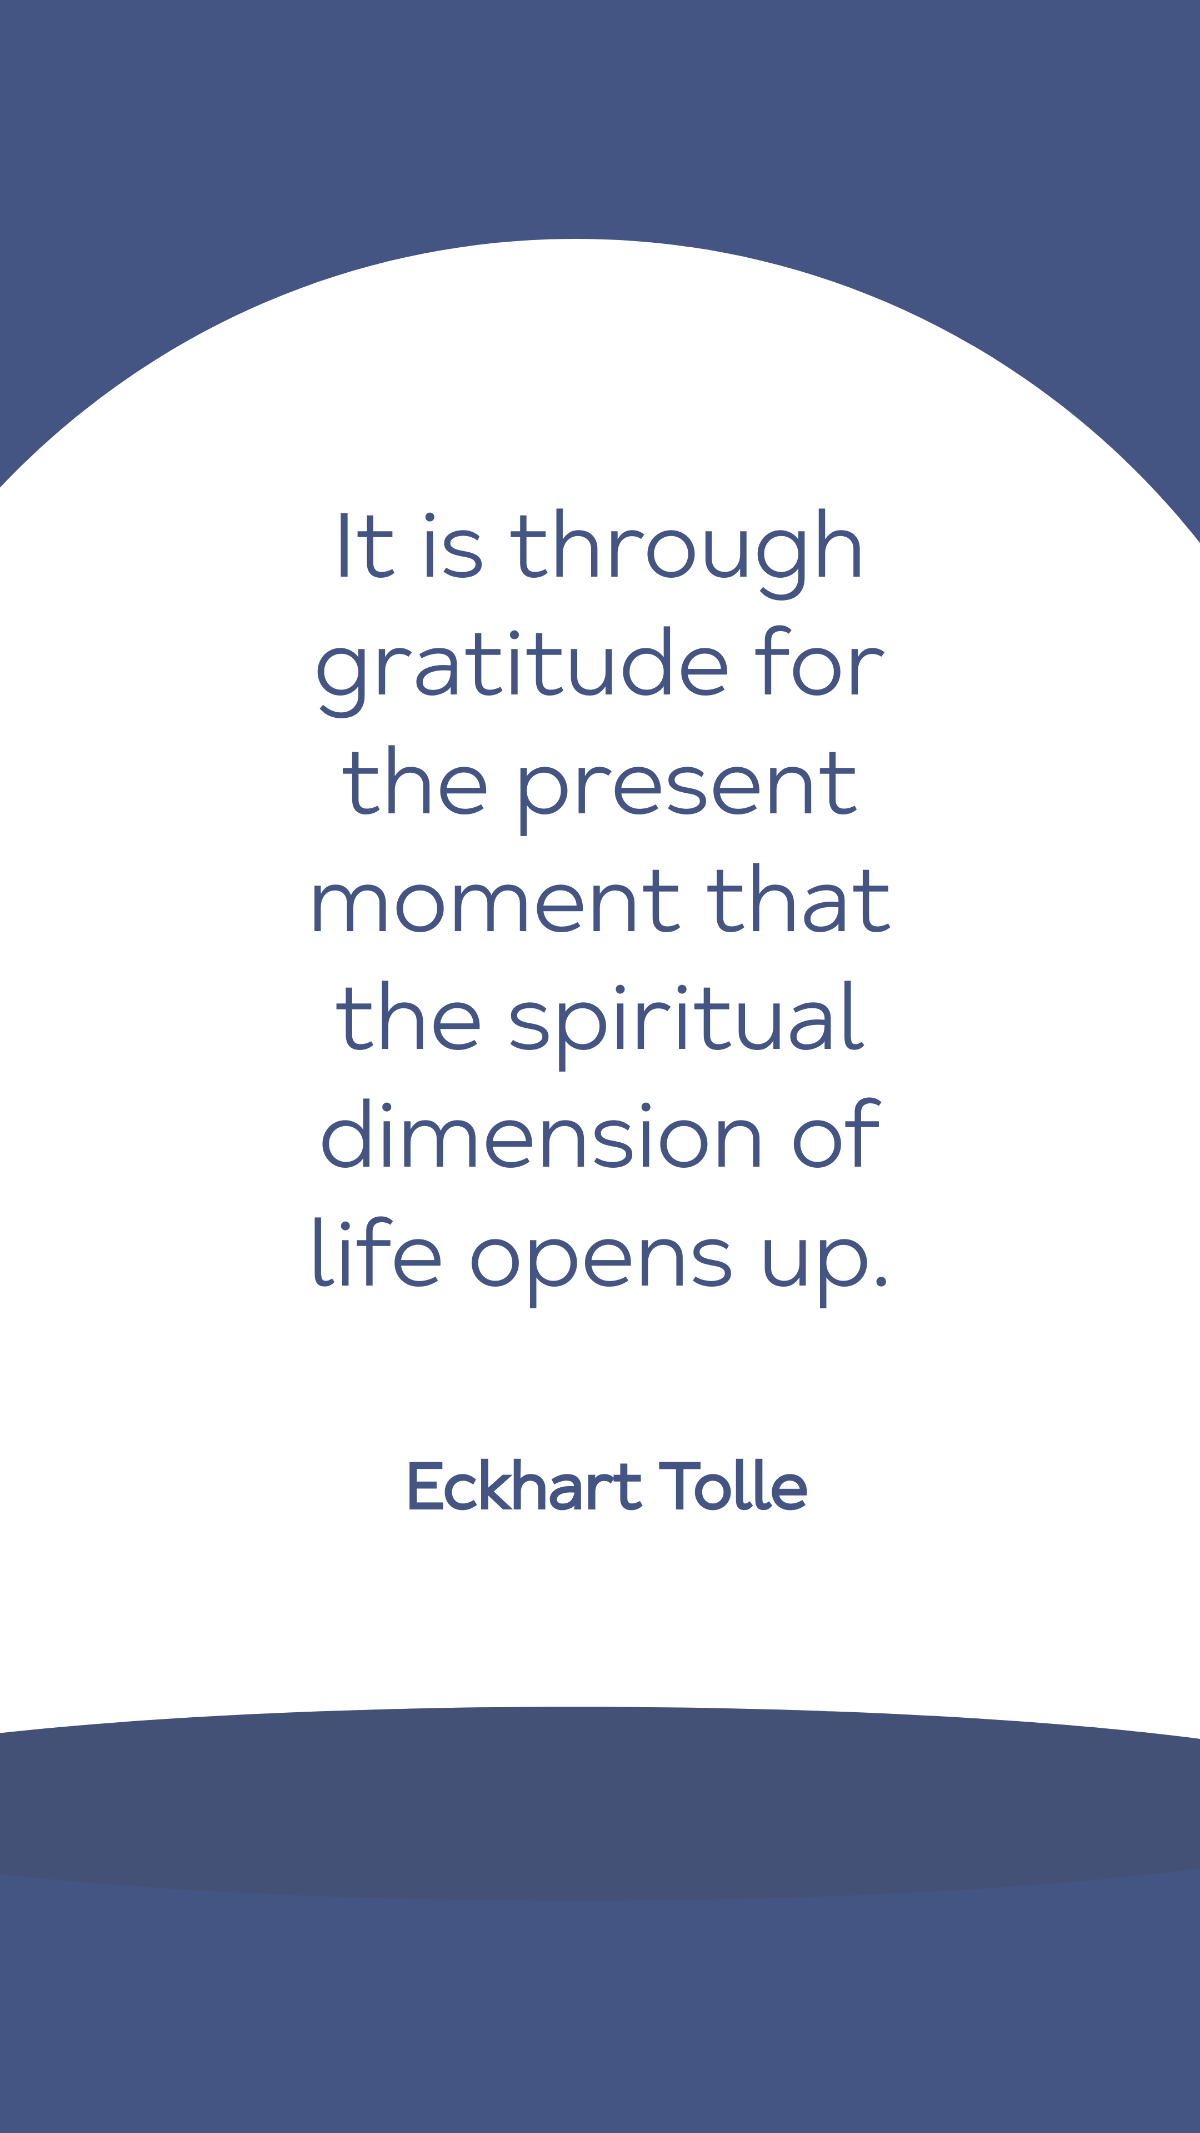 Eckhart Tolle -It is through gratitude for the present moment that the spiritual dimension of life opens up. Template